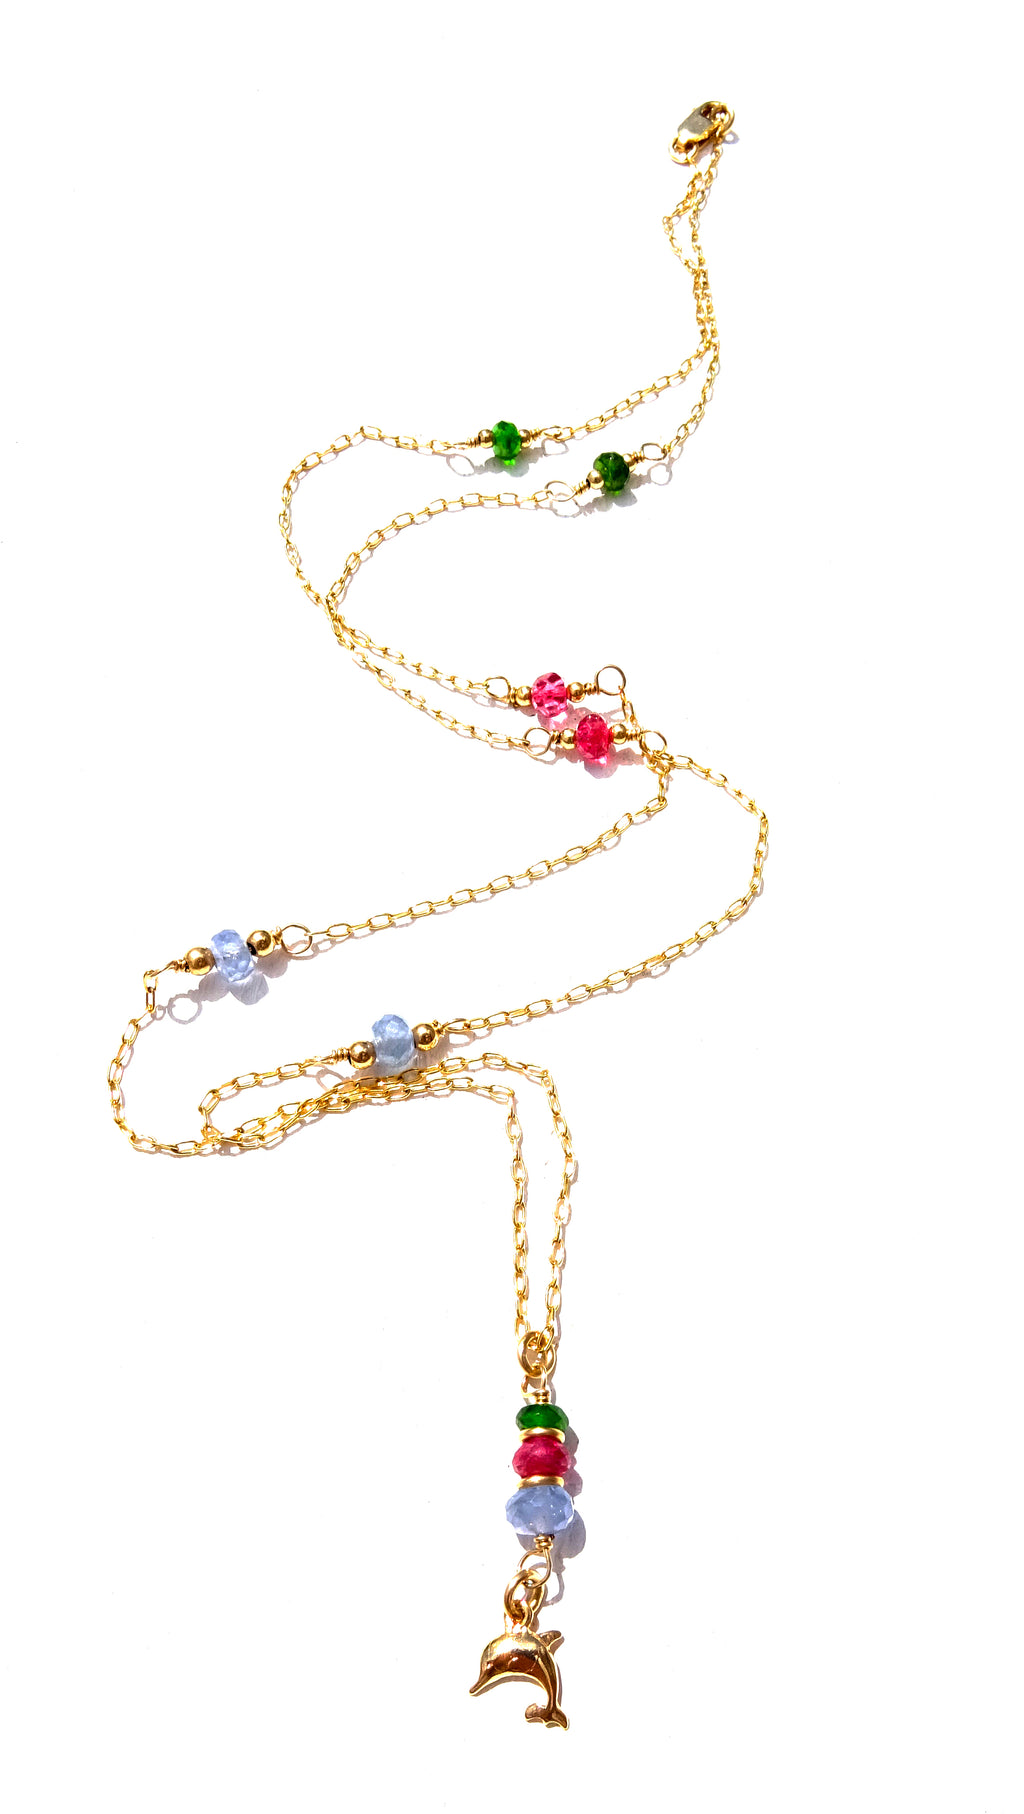 Gold filled necklace with gemstones,Pink spinal,Tsavorite and Tanzanite with a dolphin pendant